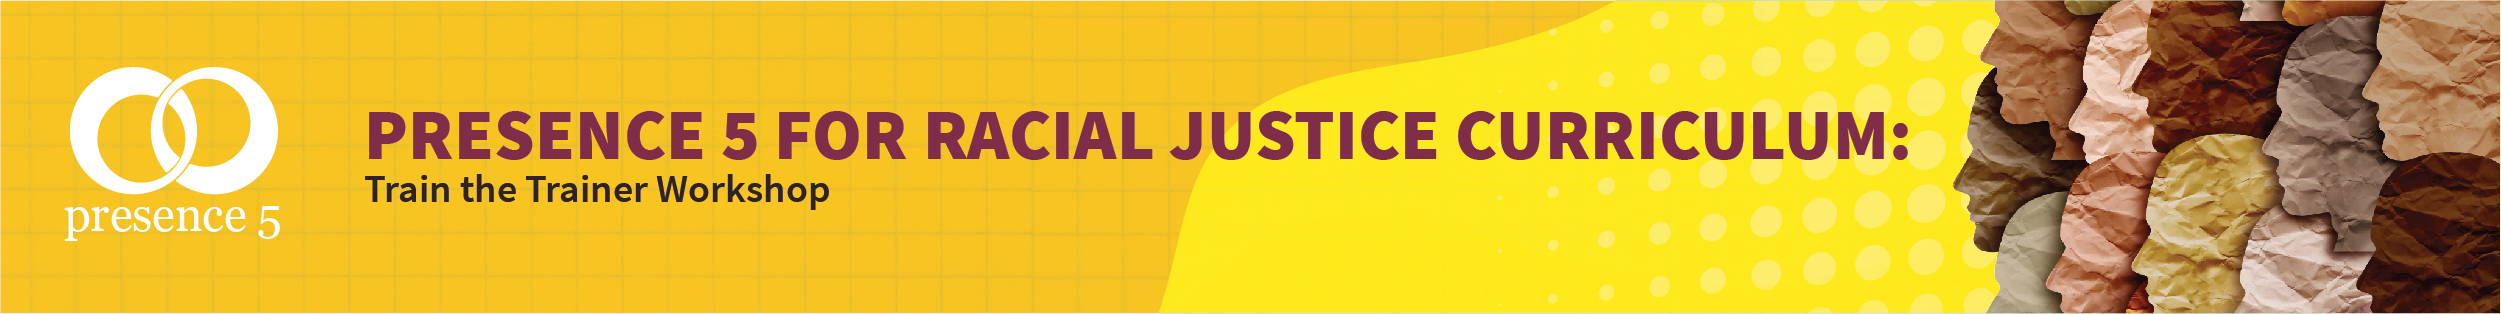 Presence 5 for Racial Justice in Medical Education: Train the Trainer Workshop Banner